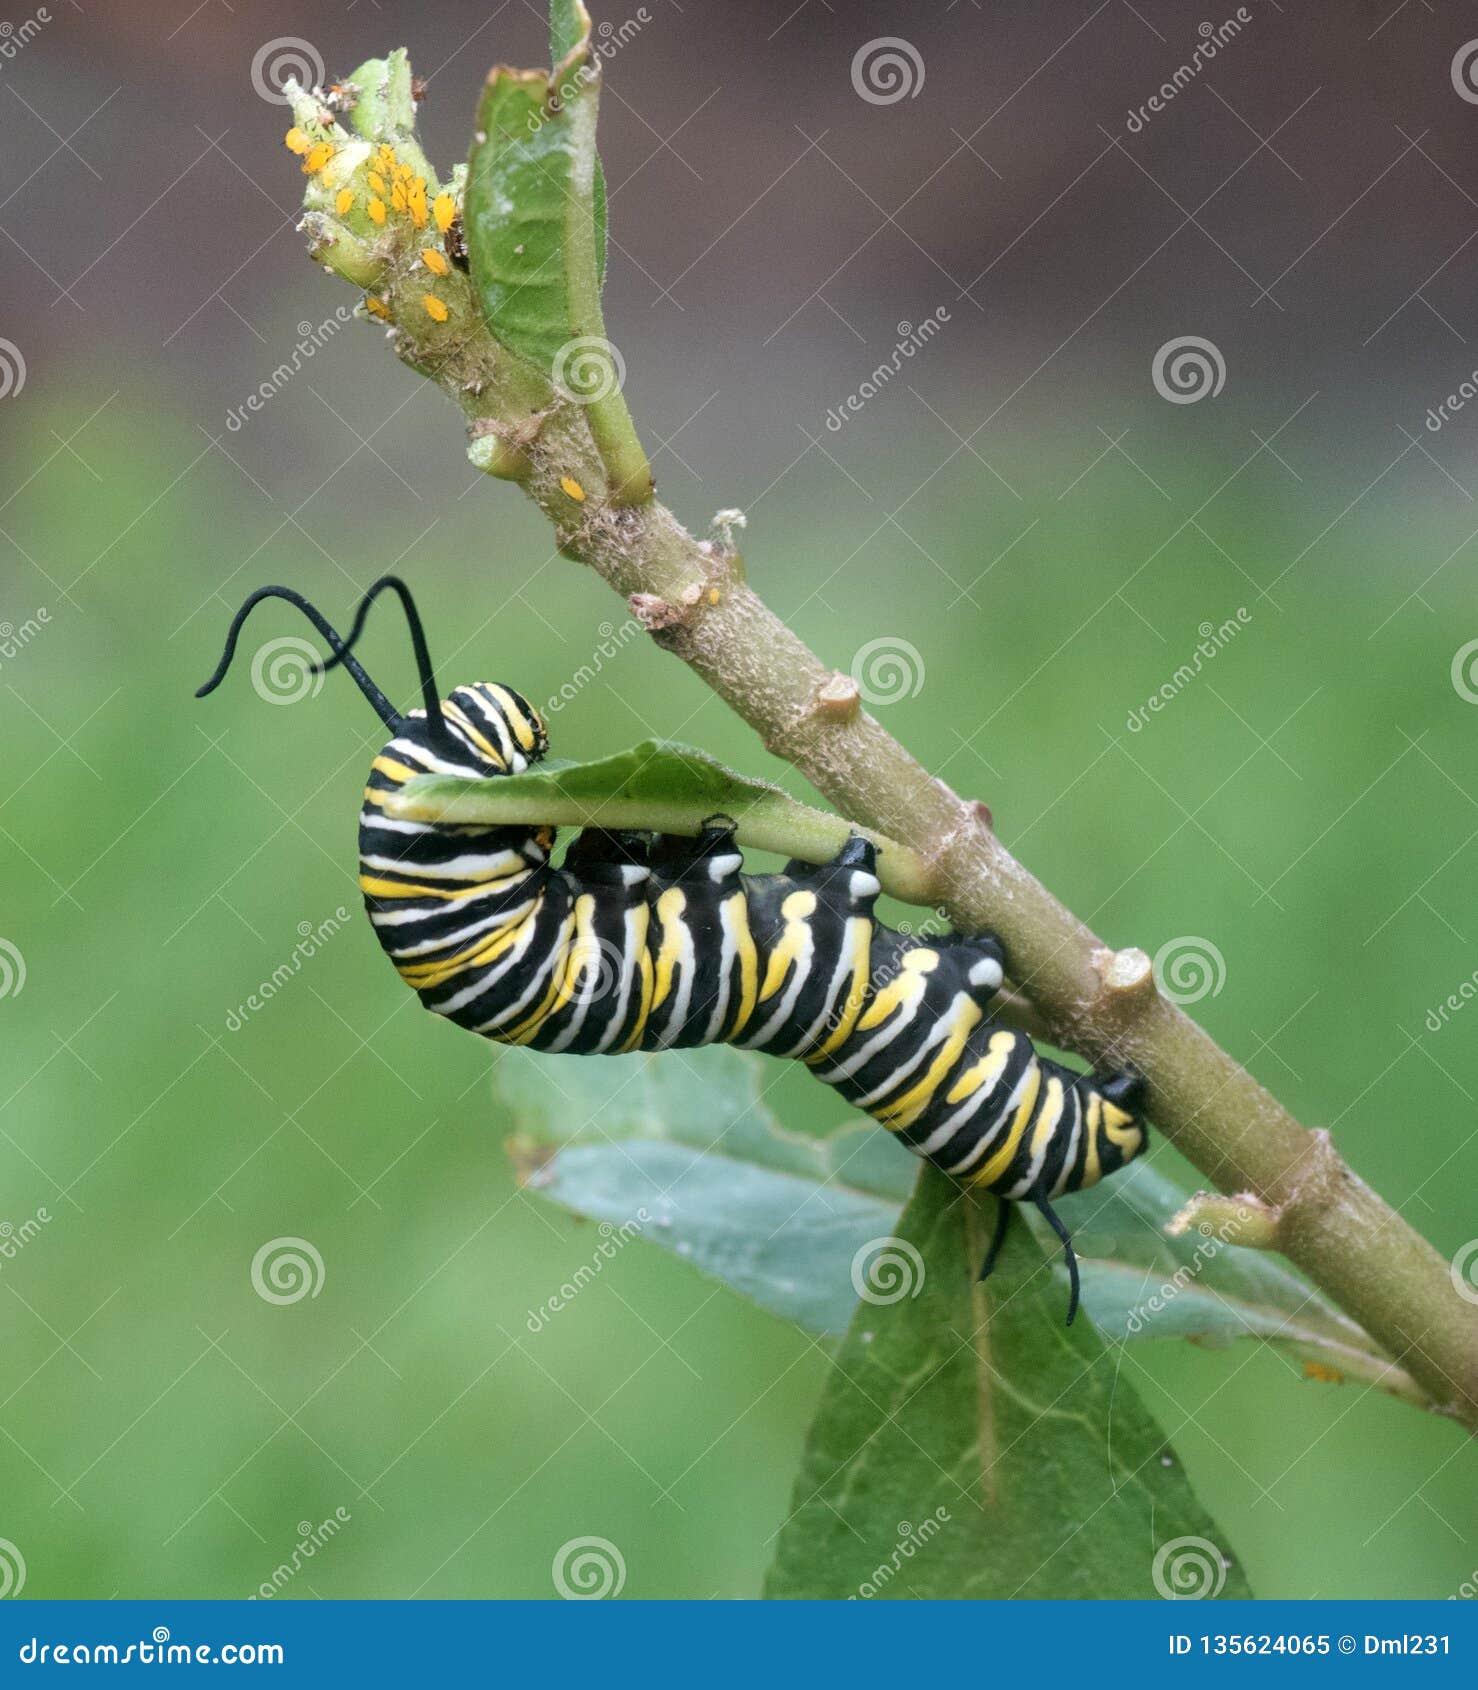 Monarch Butterfly Caterpillar Eating Leaf Stock Image - Image of white ...